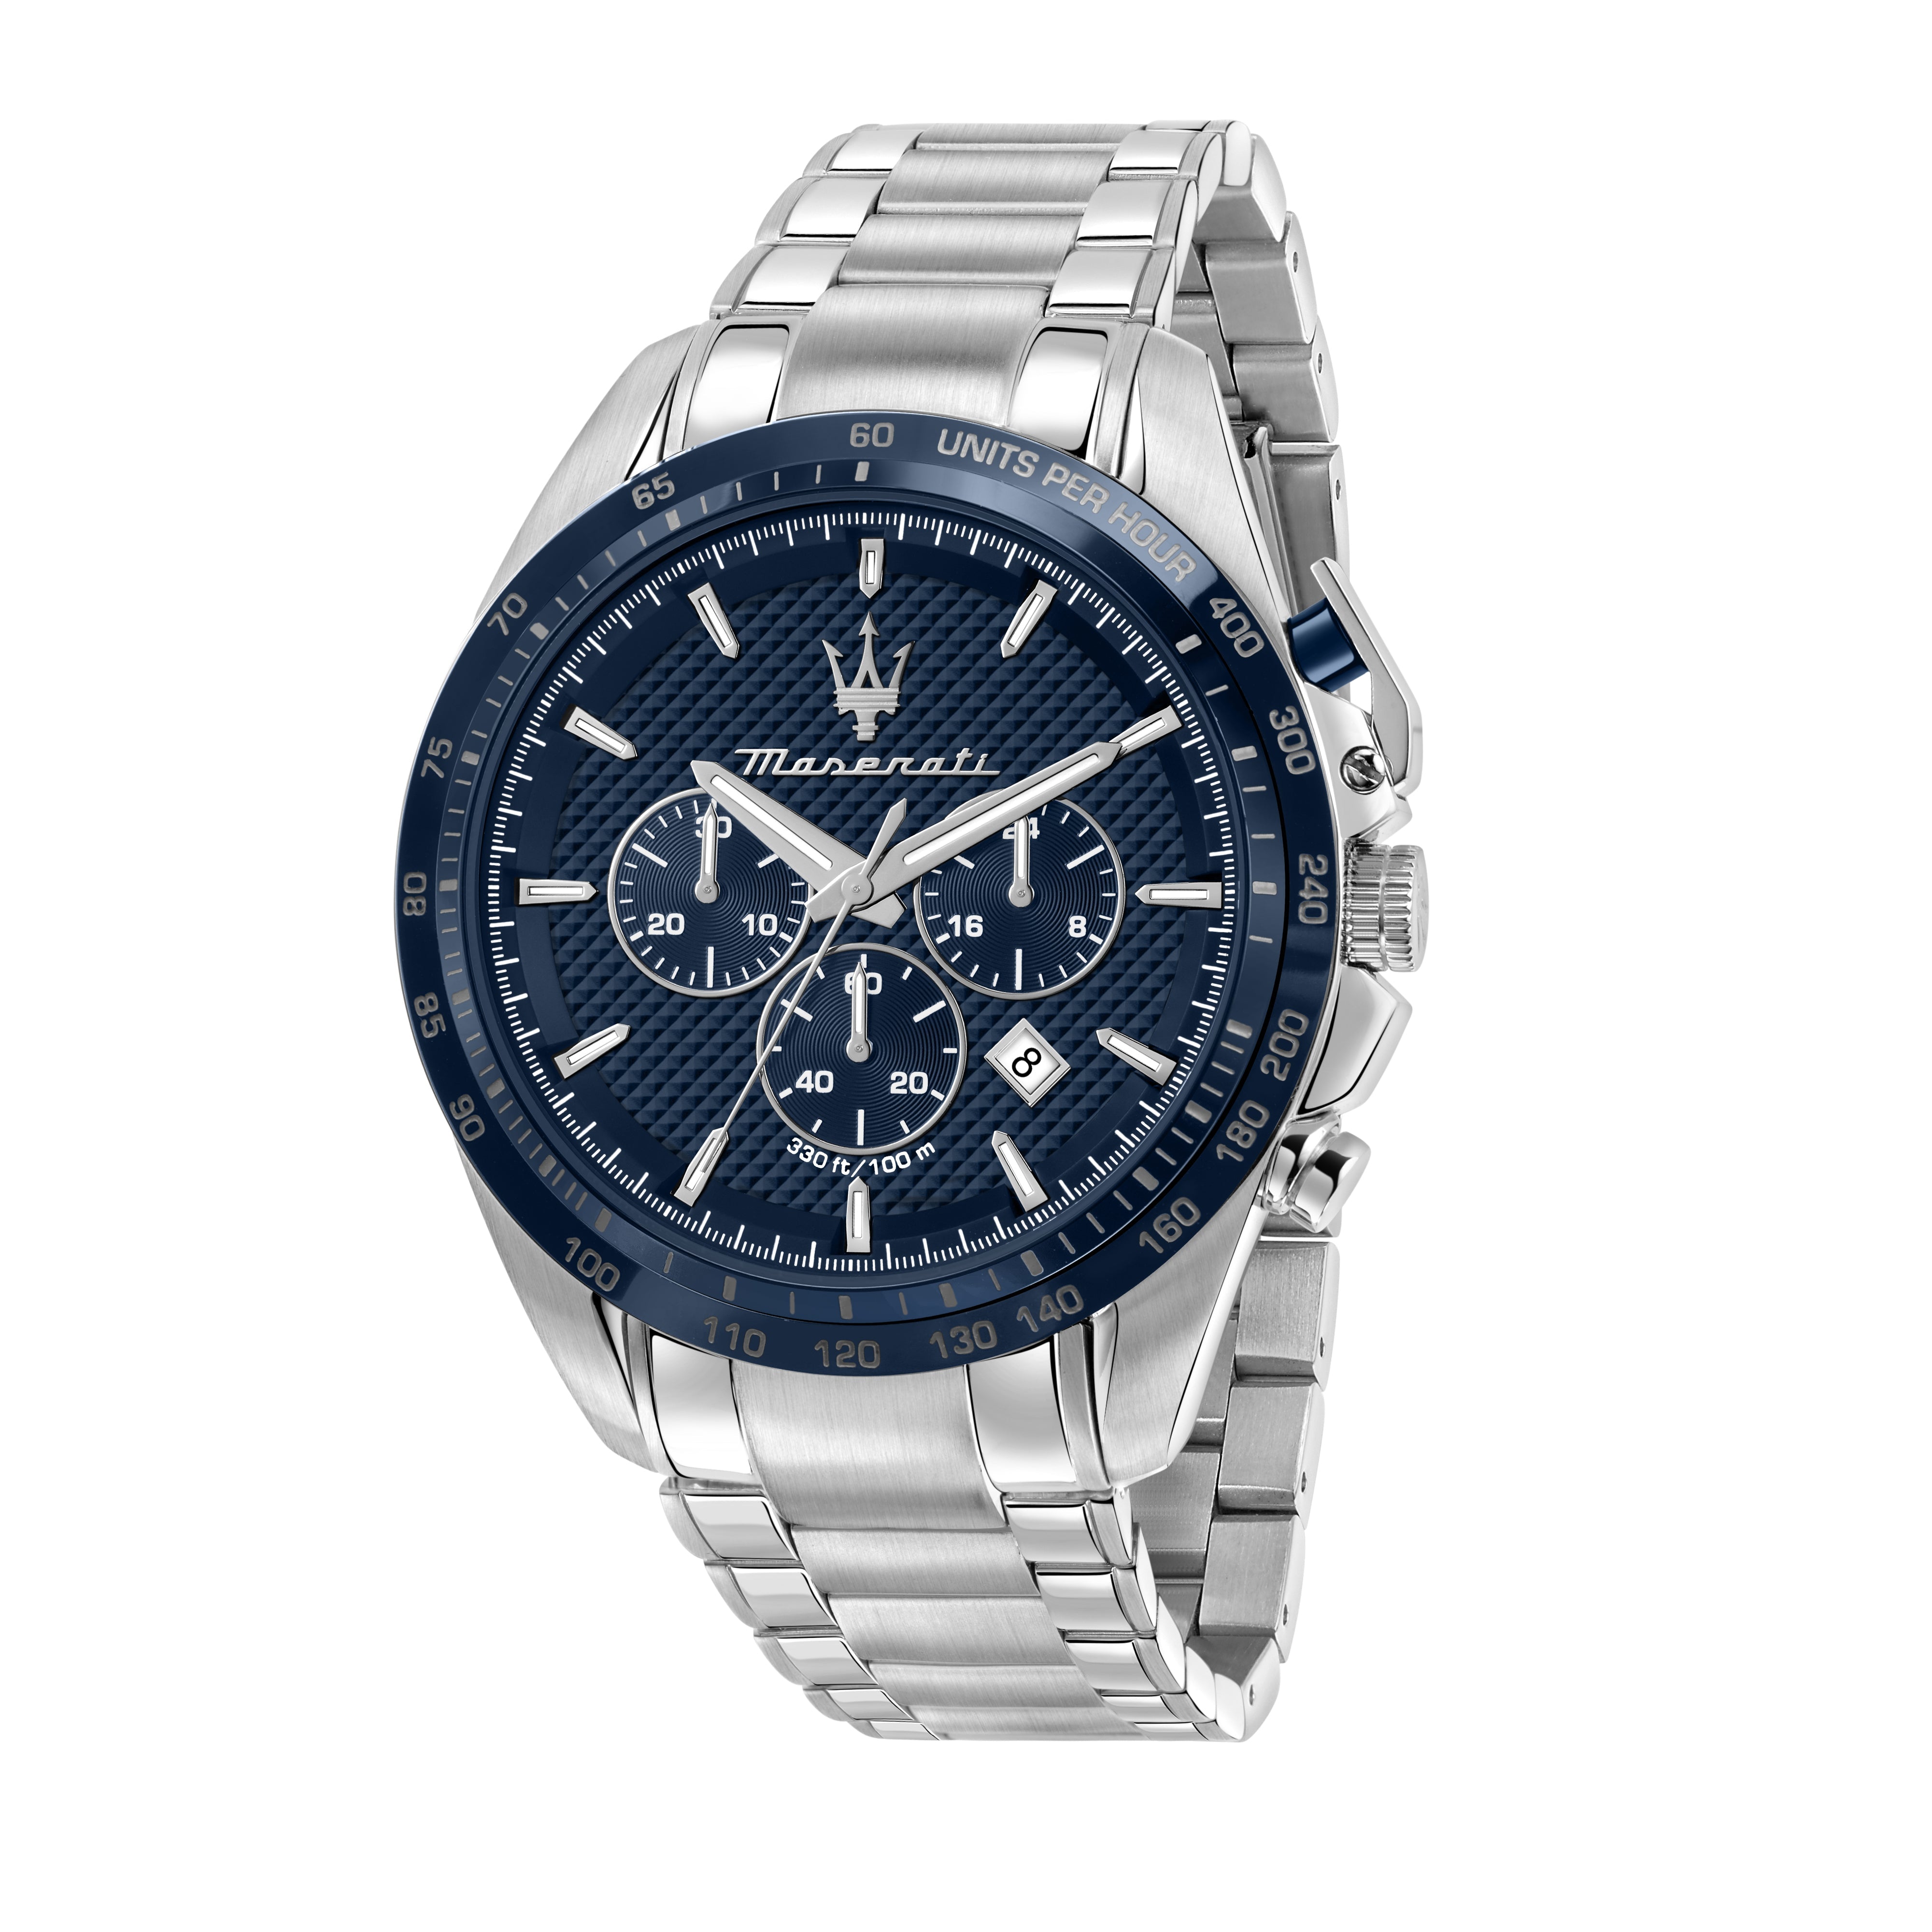 Traguardo 45mm Stainless Steel Chronograph Watch